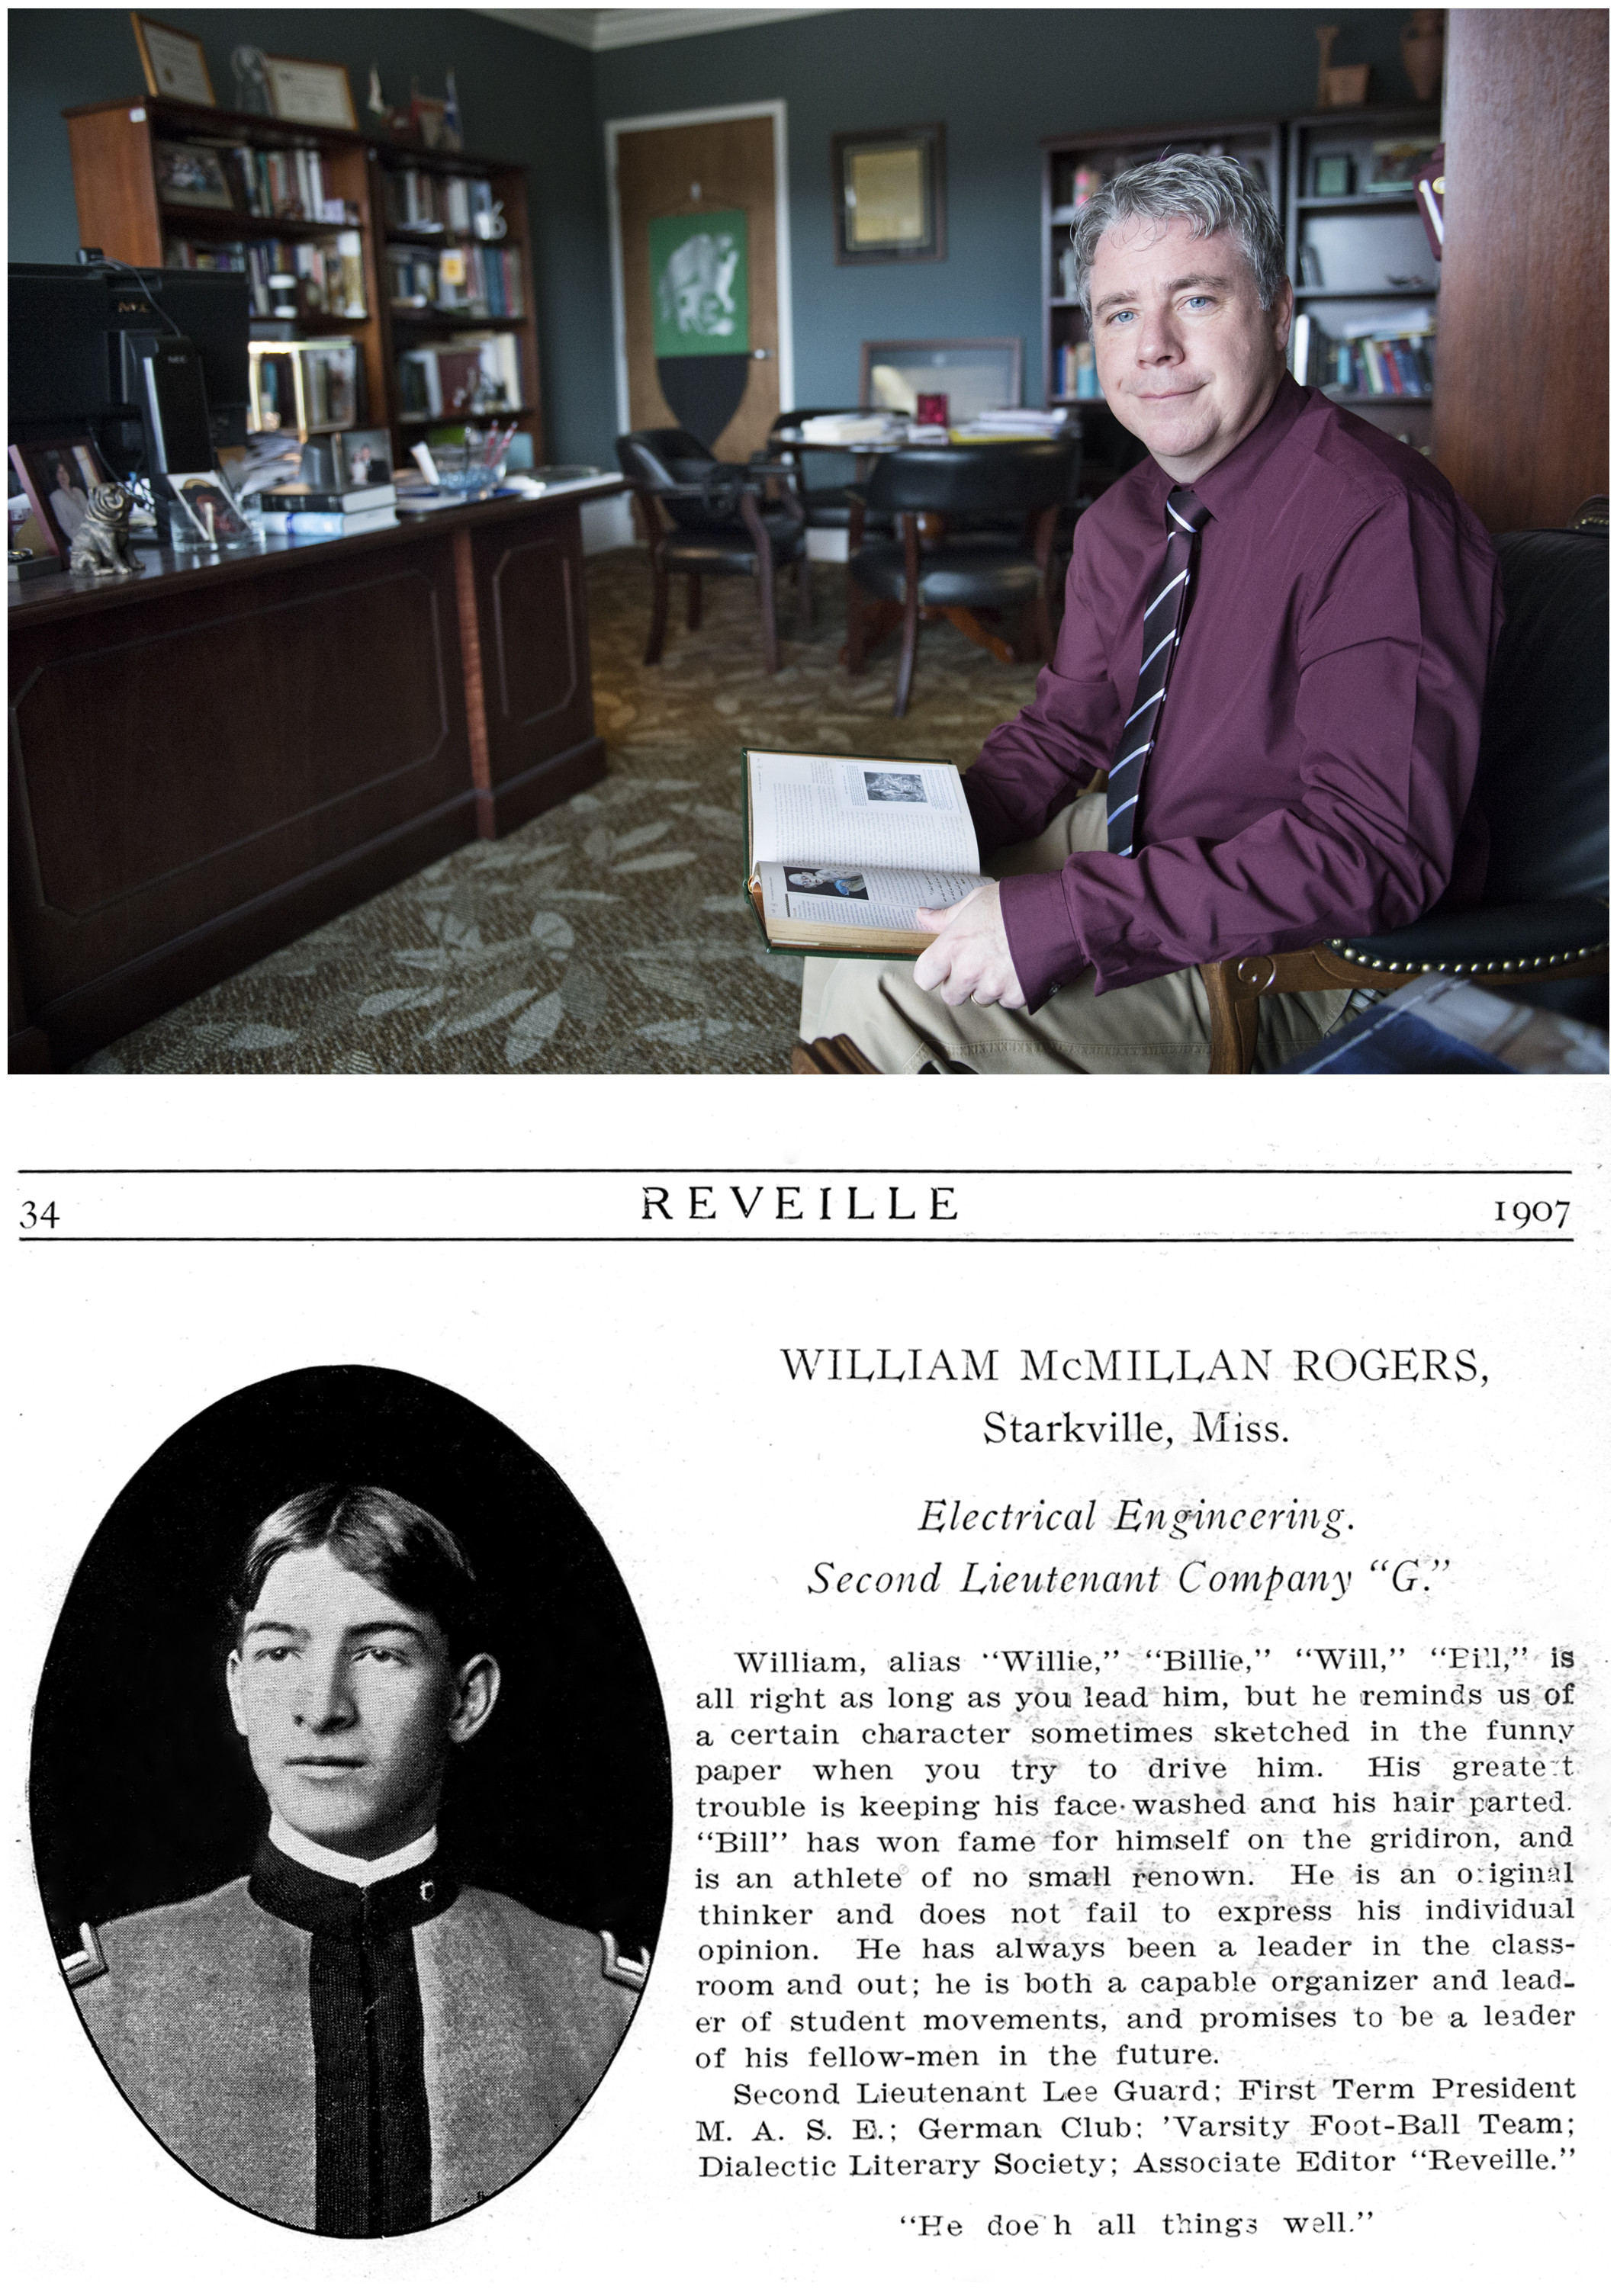 Top: Mississippi State University Shackouls Honors College Dean Christopher A. Snyder<br /><br />
(Photo by Megan Bean);<br /><br />
Bottom: Major William M. Rogers, MSU's first Rhodes Scholar<br /><br />
